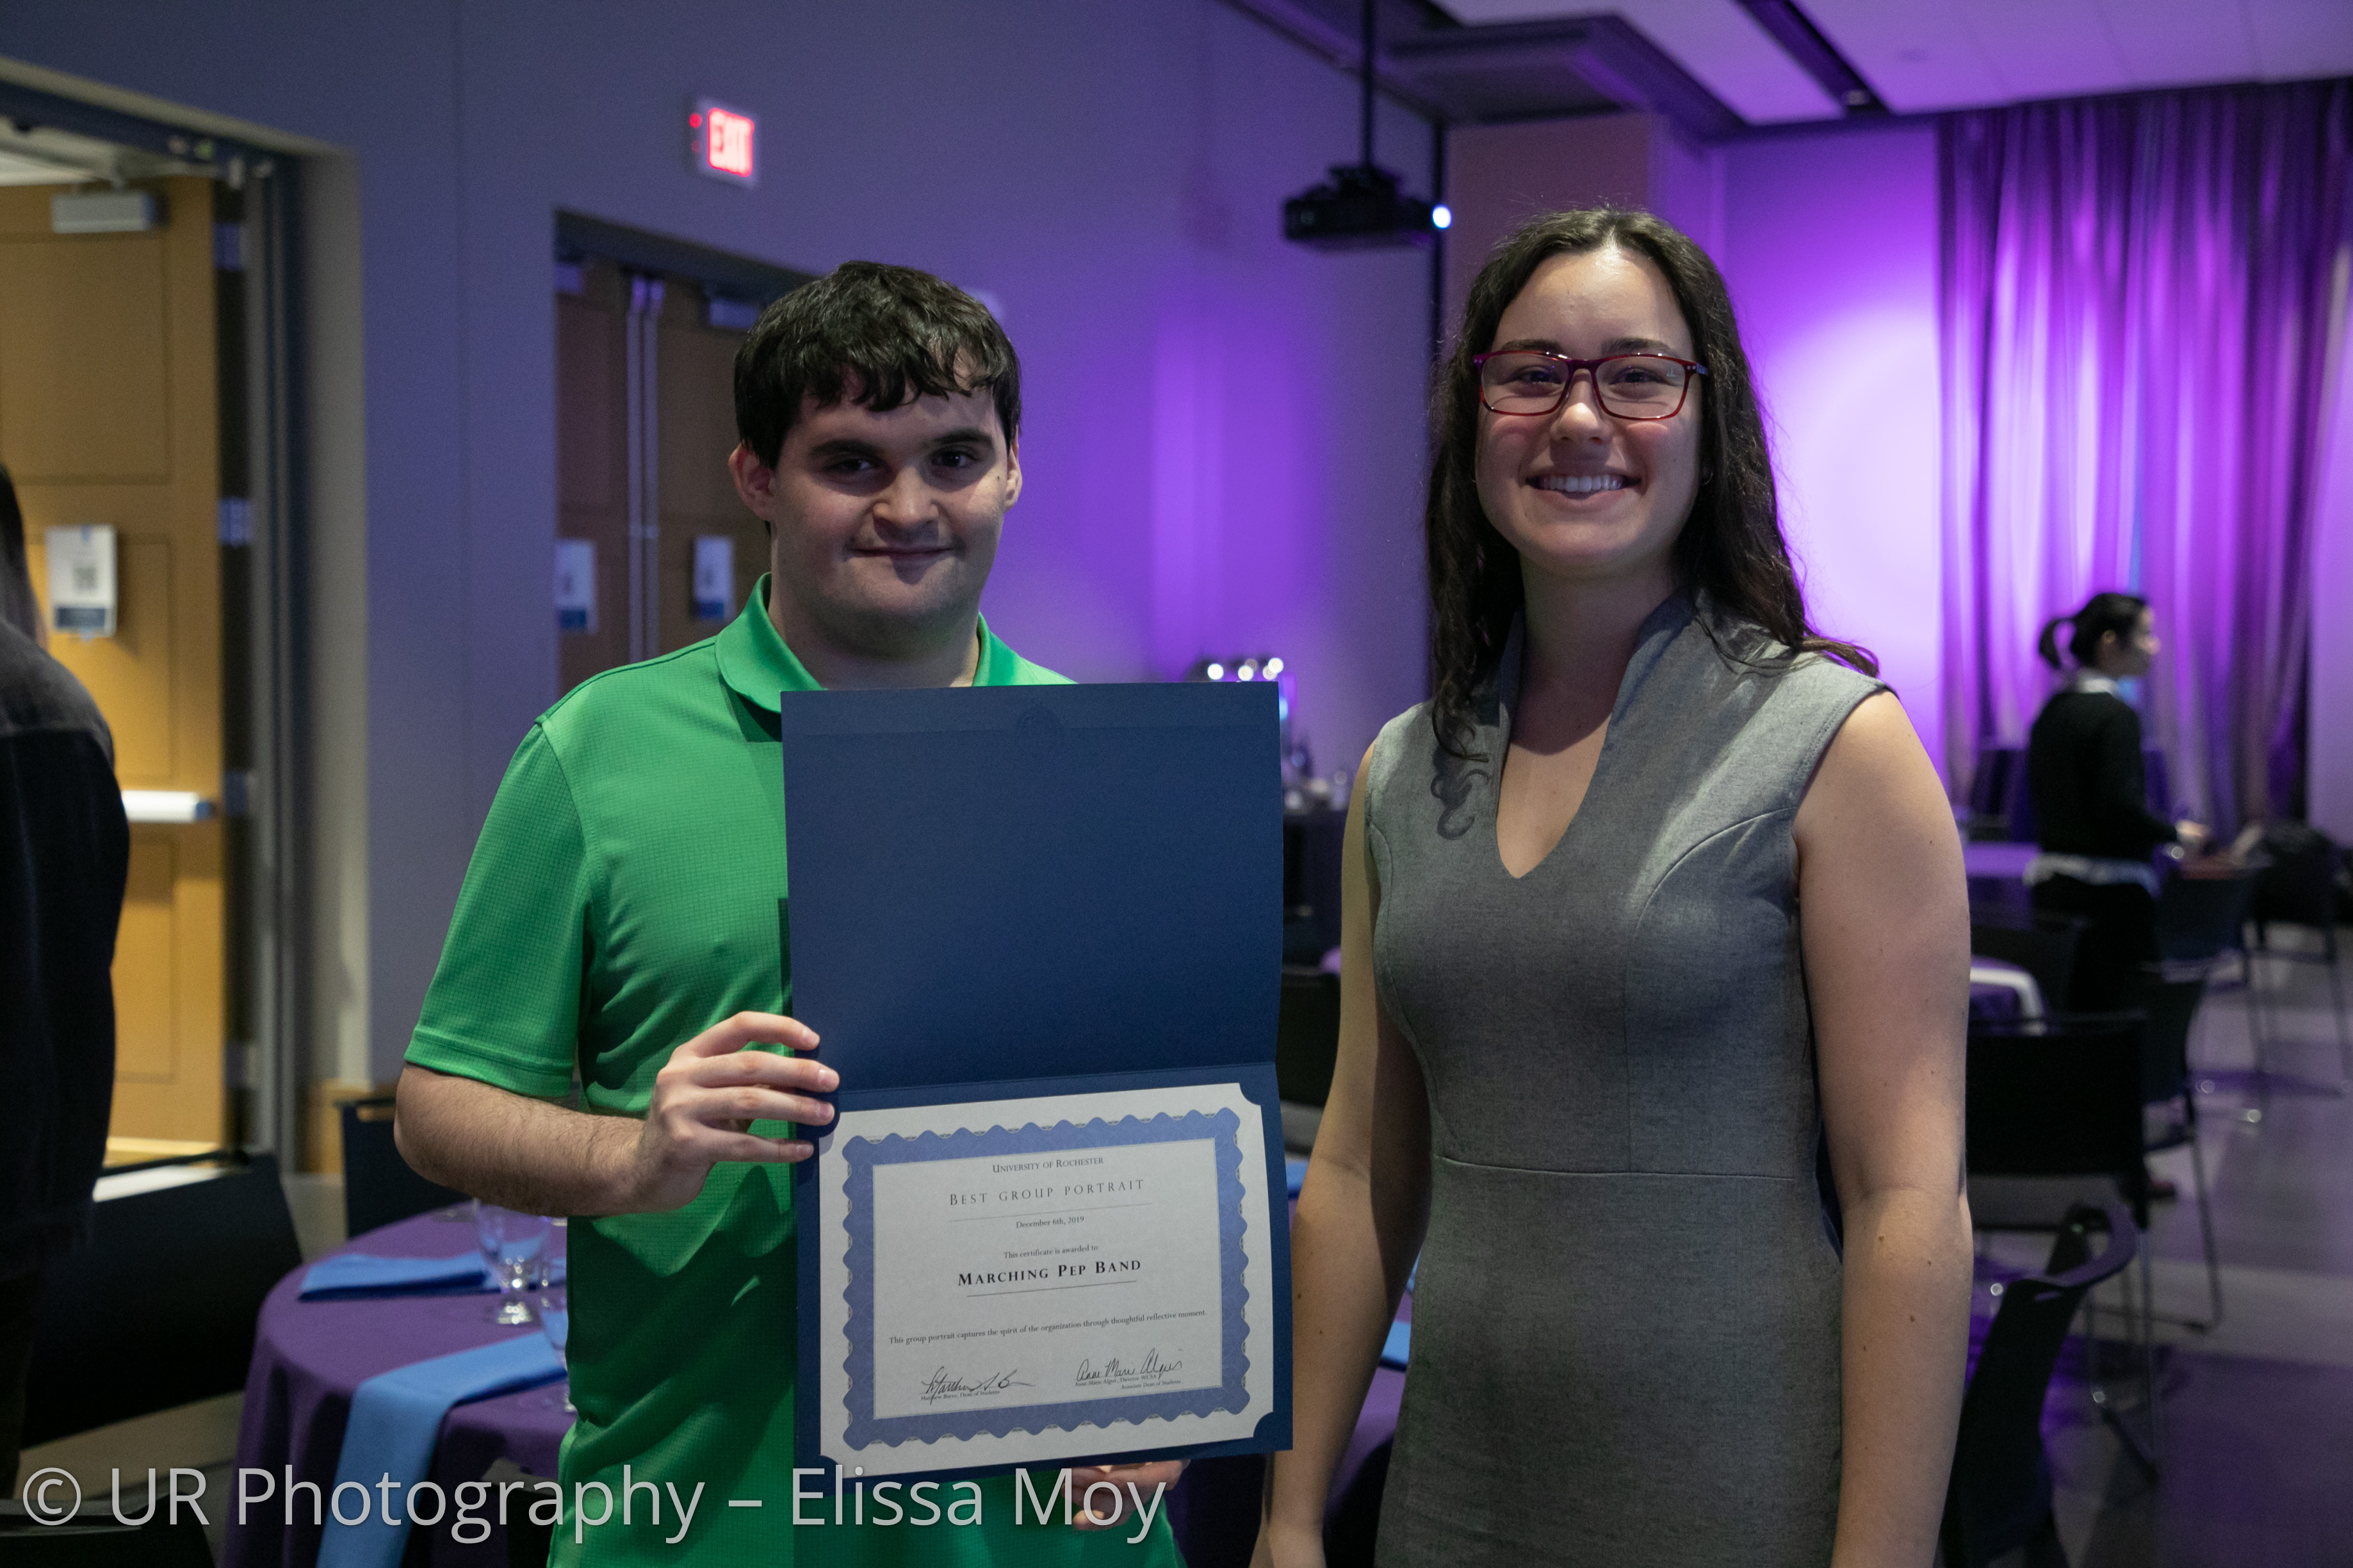 Two students posing with one presenting a certificate